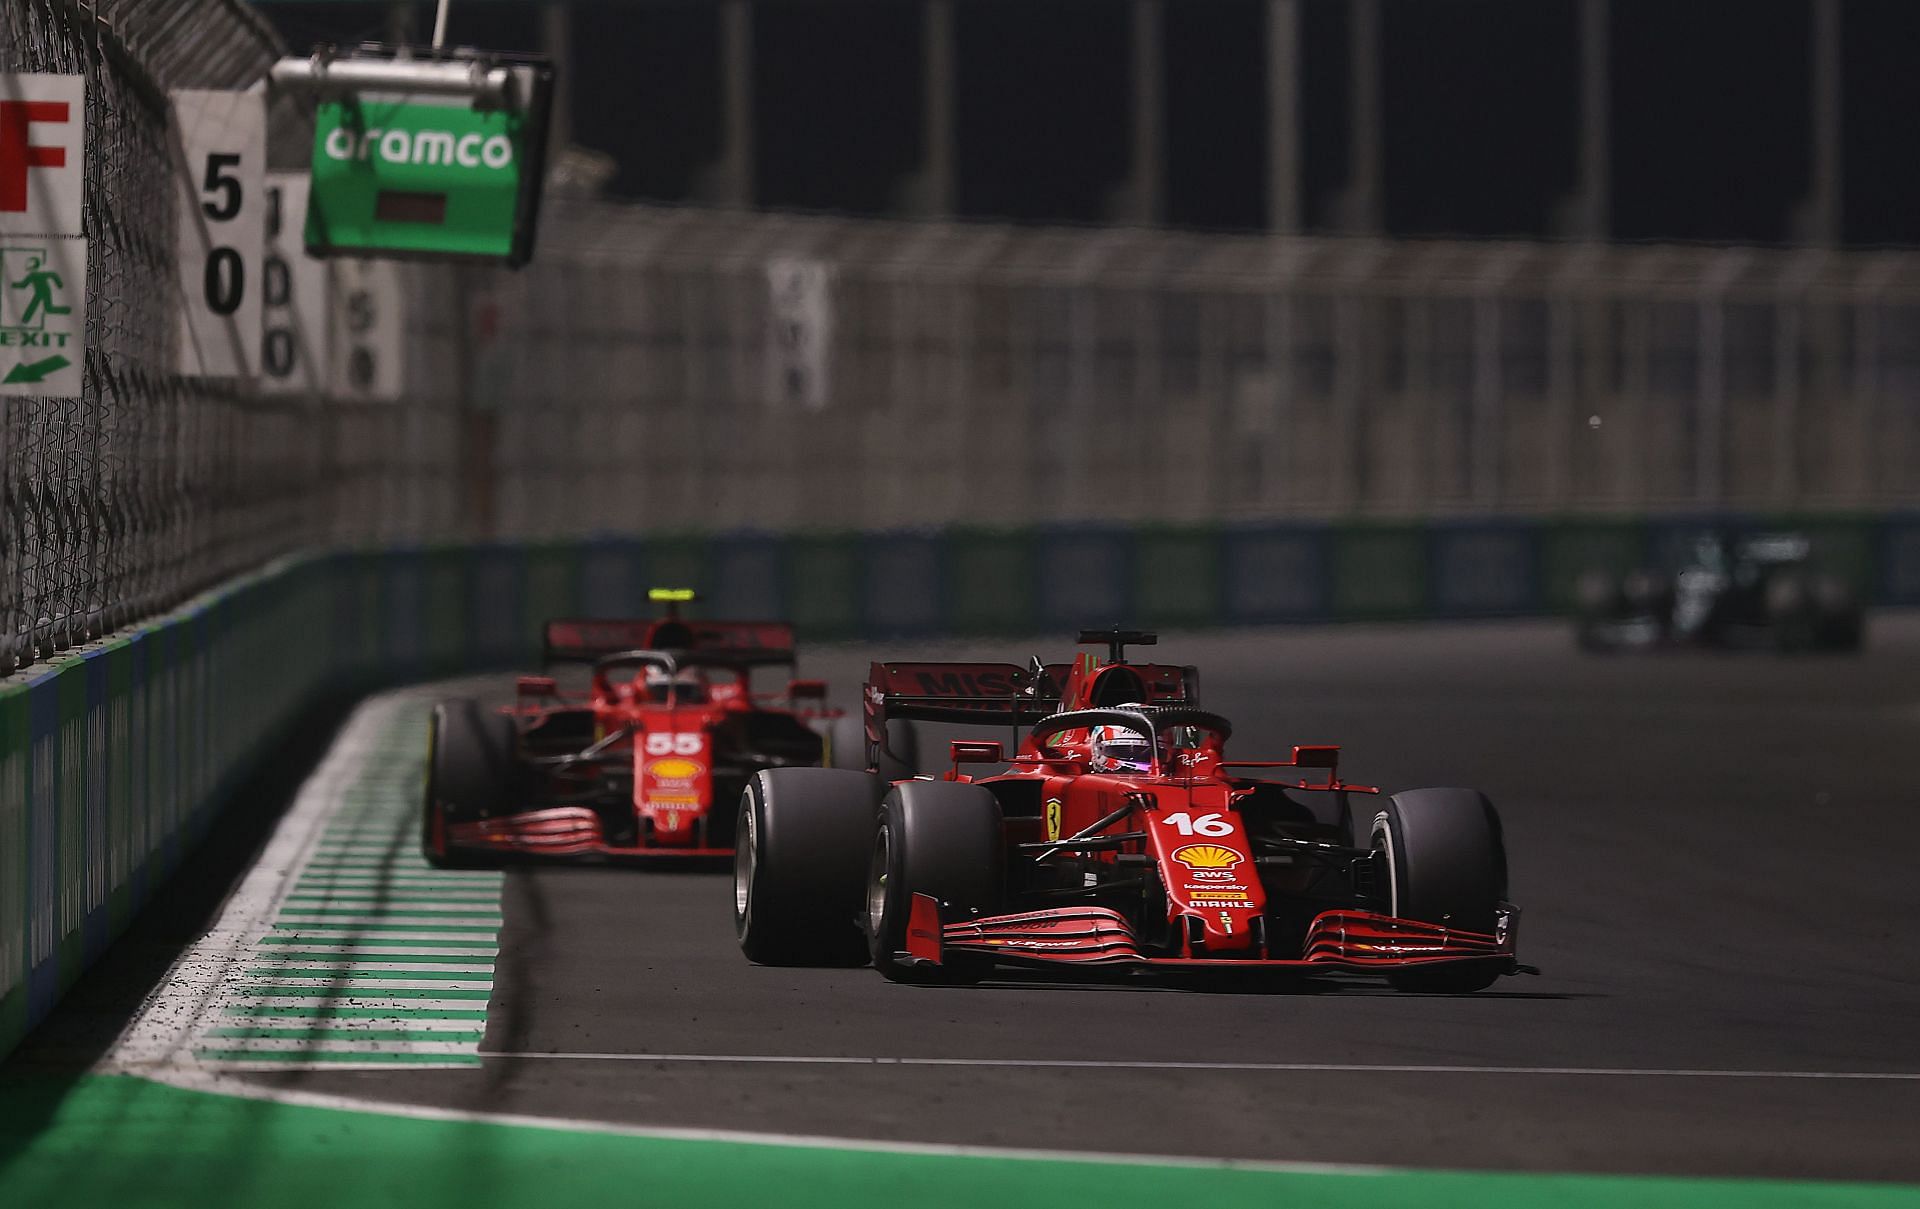 Ferrari could be the next champion in F1